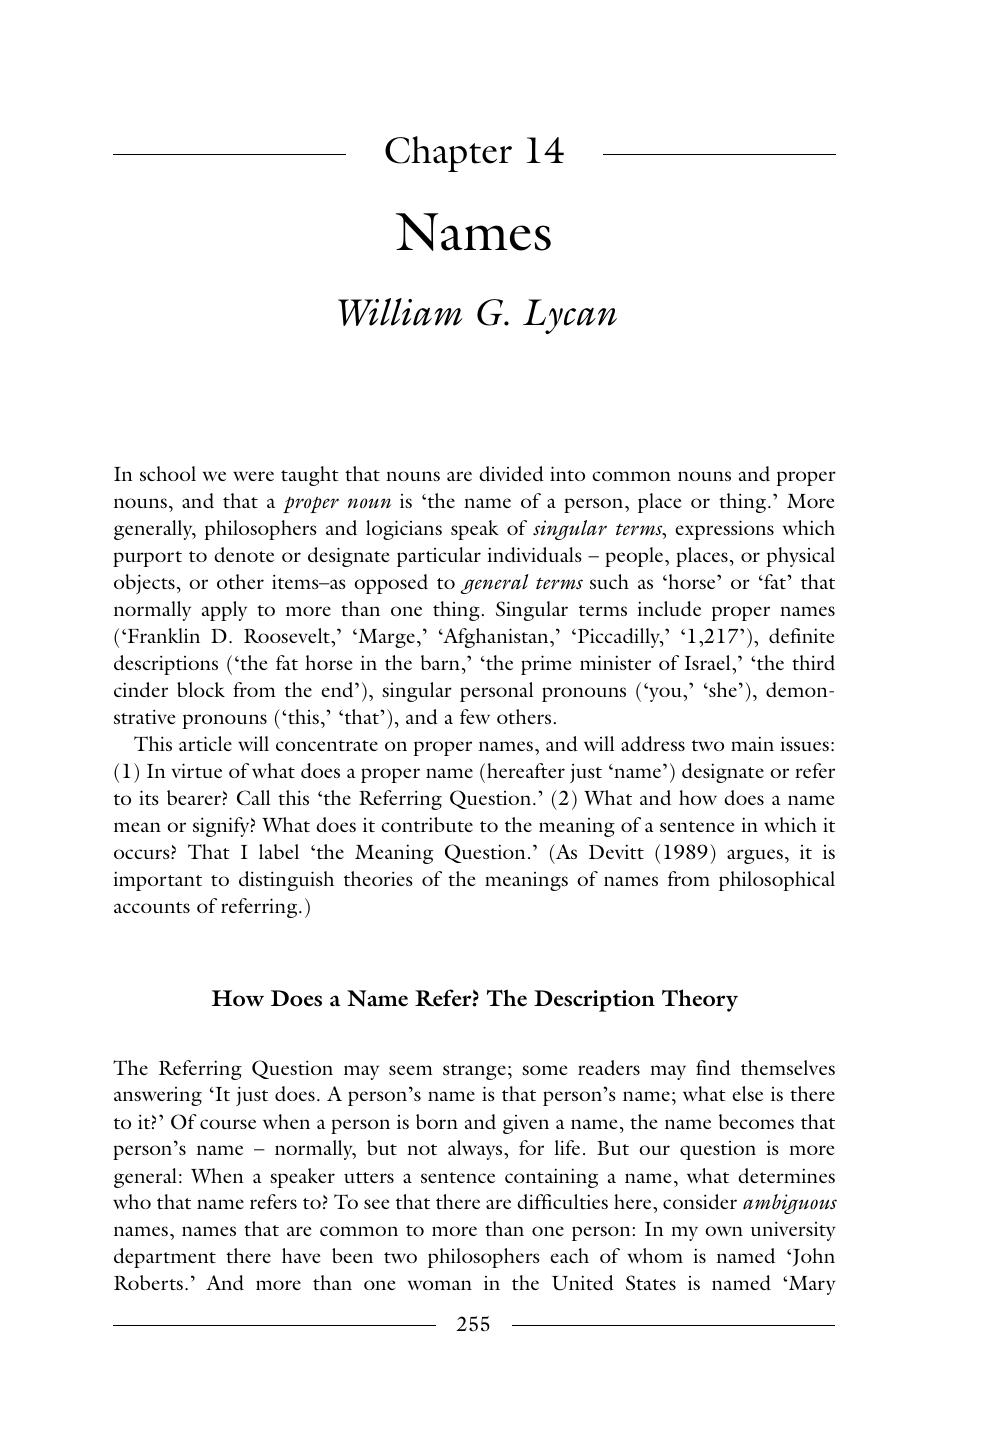 Names (The Blackwell Guide To The Philosophy Of Language (Blackwell, 2006) - Chapter 14